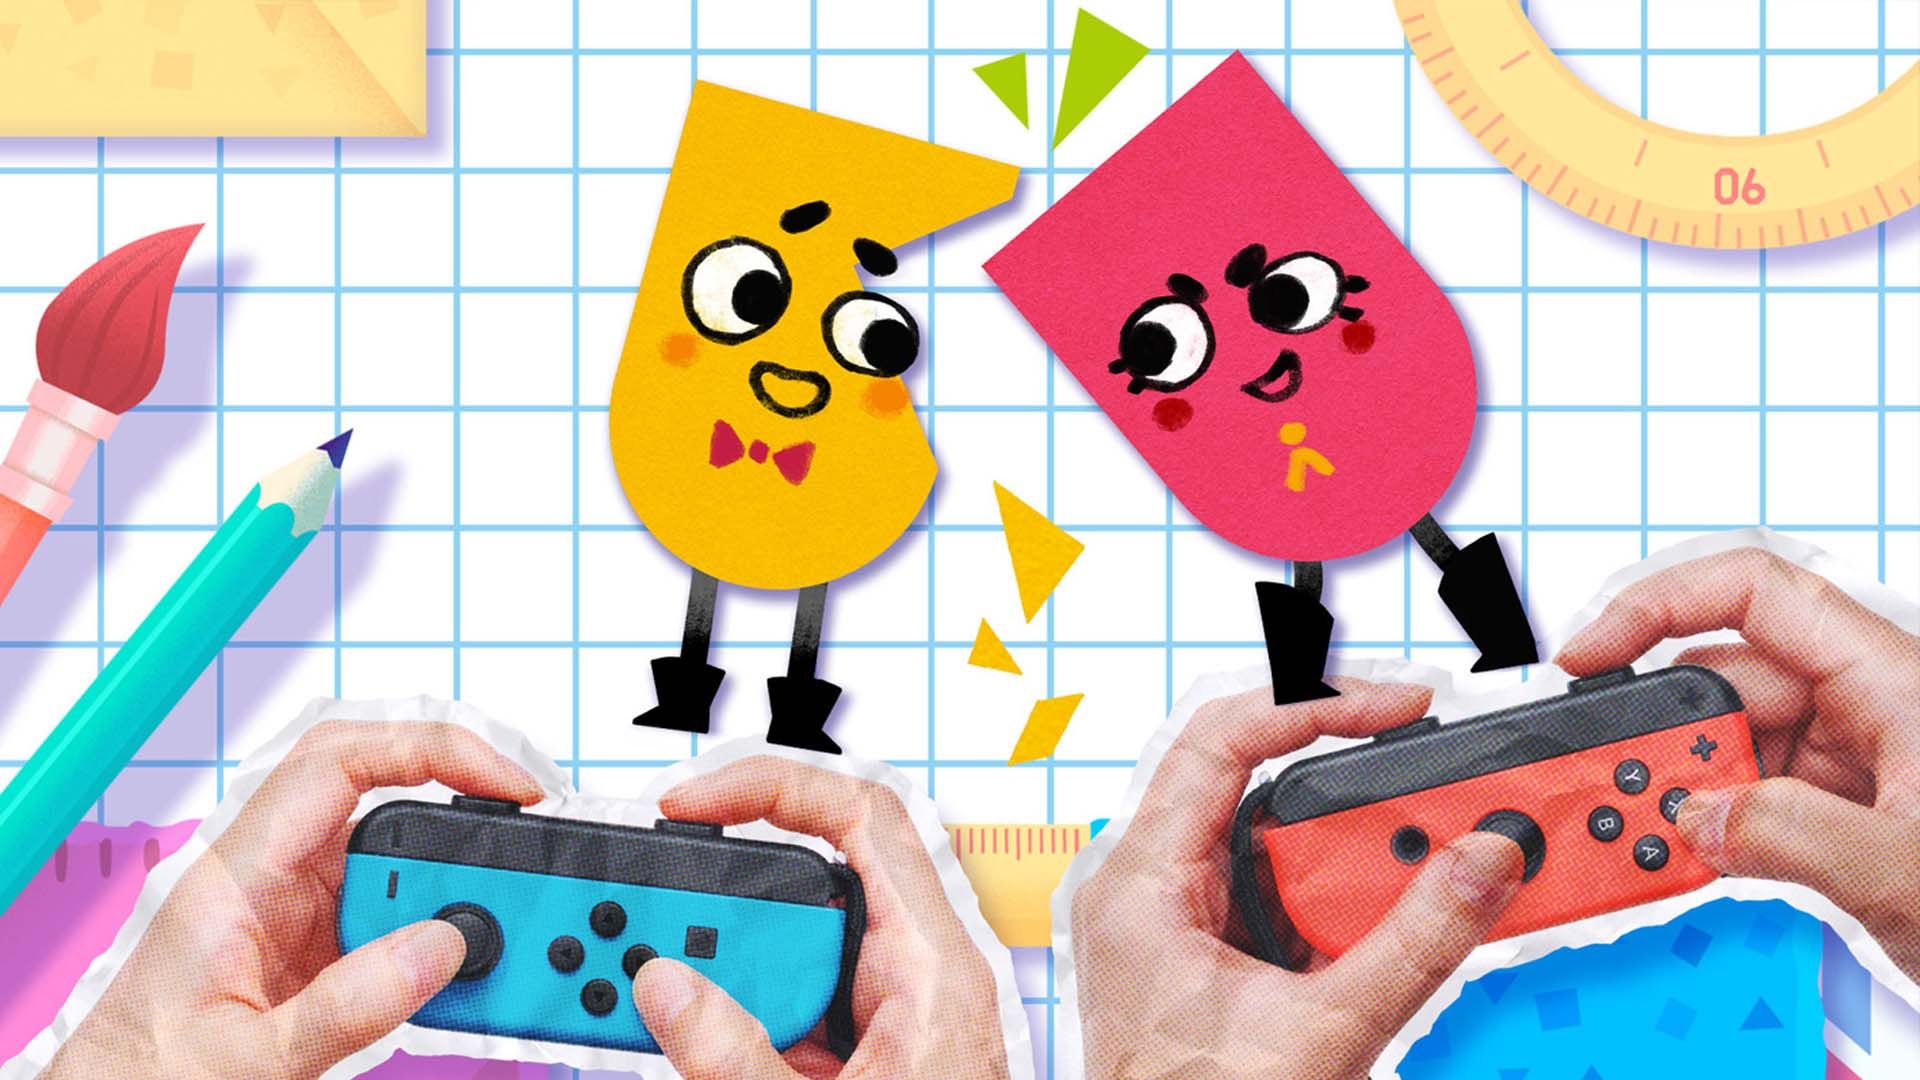 Wallpaper Snipperclips Video game, gaming